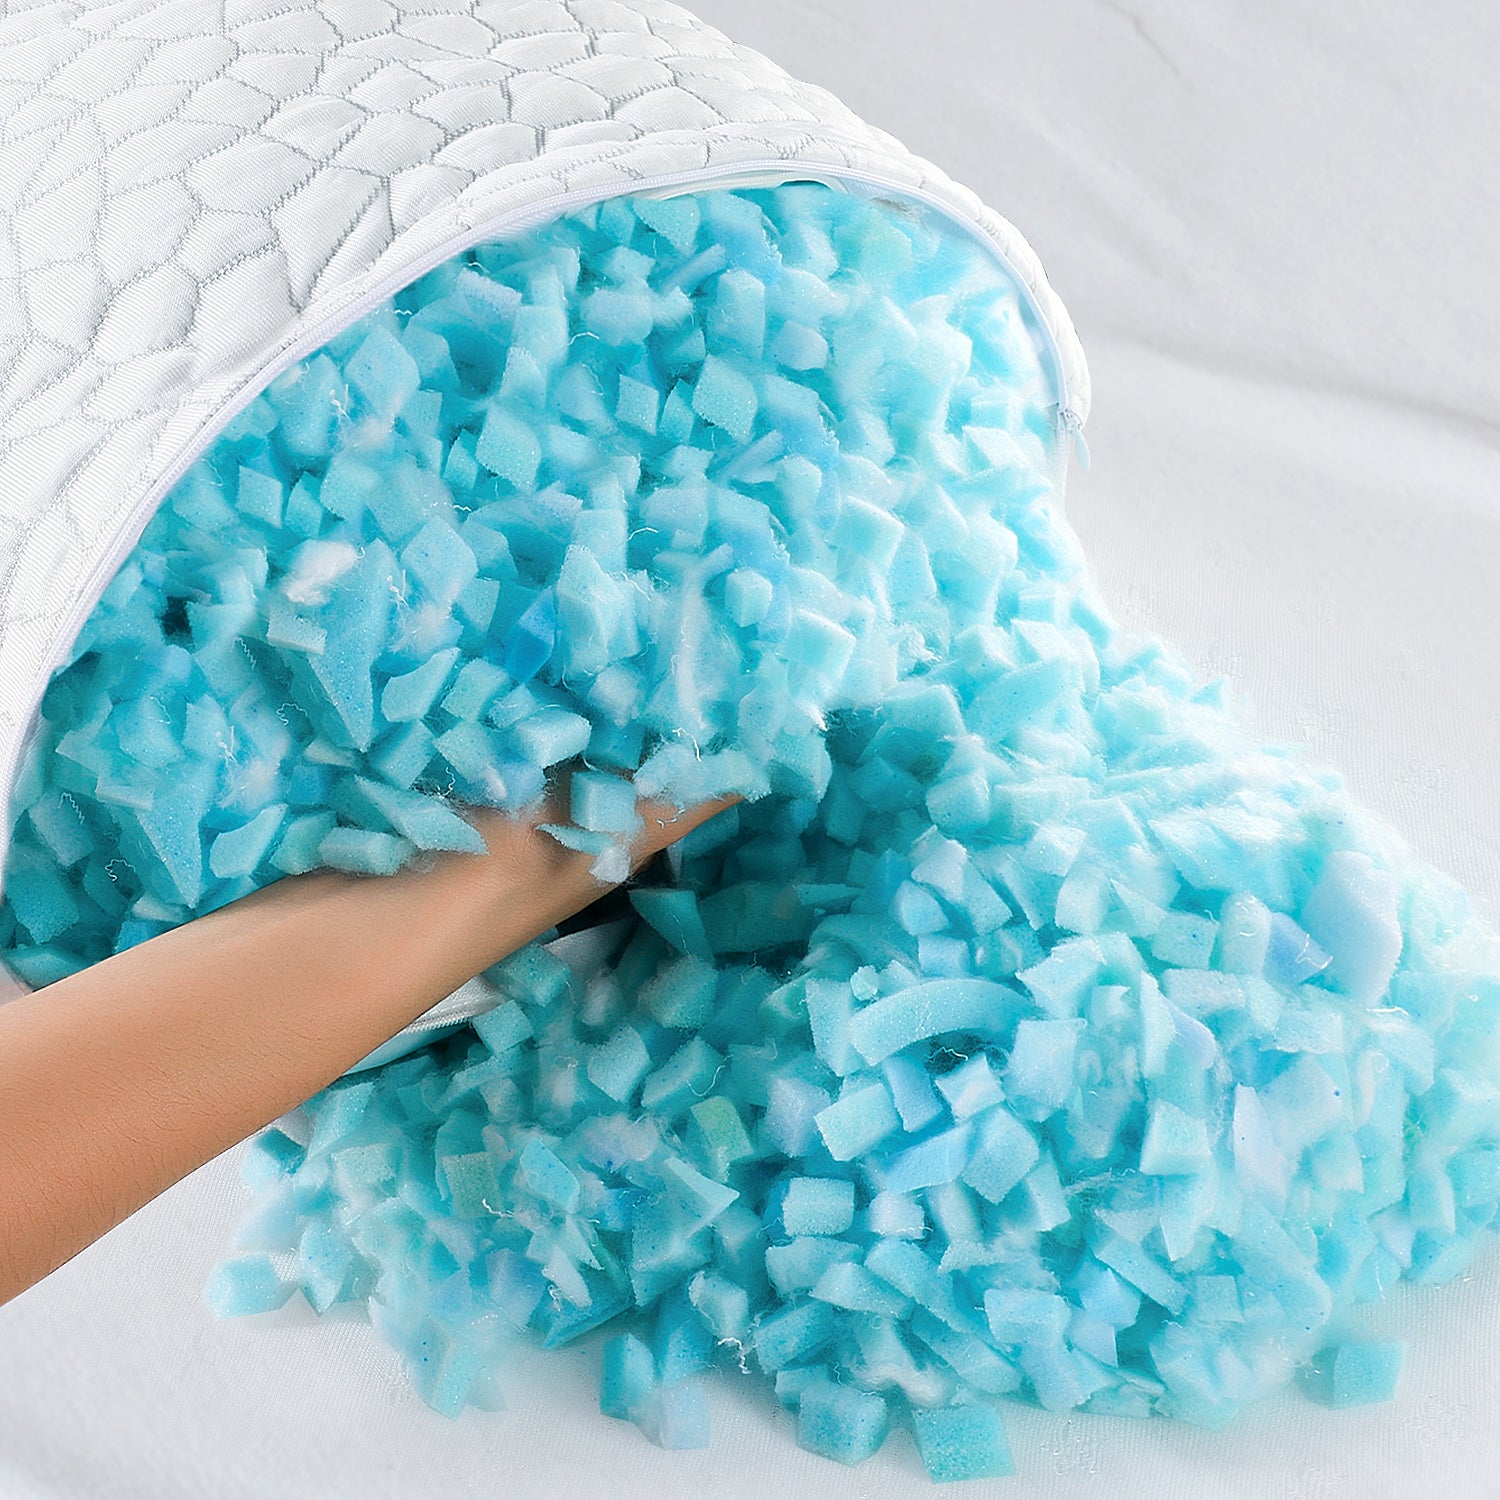 QUTOOL Cooling Bed Pillows for Sleeping Adjustable Gel Shredded